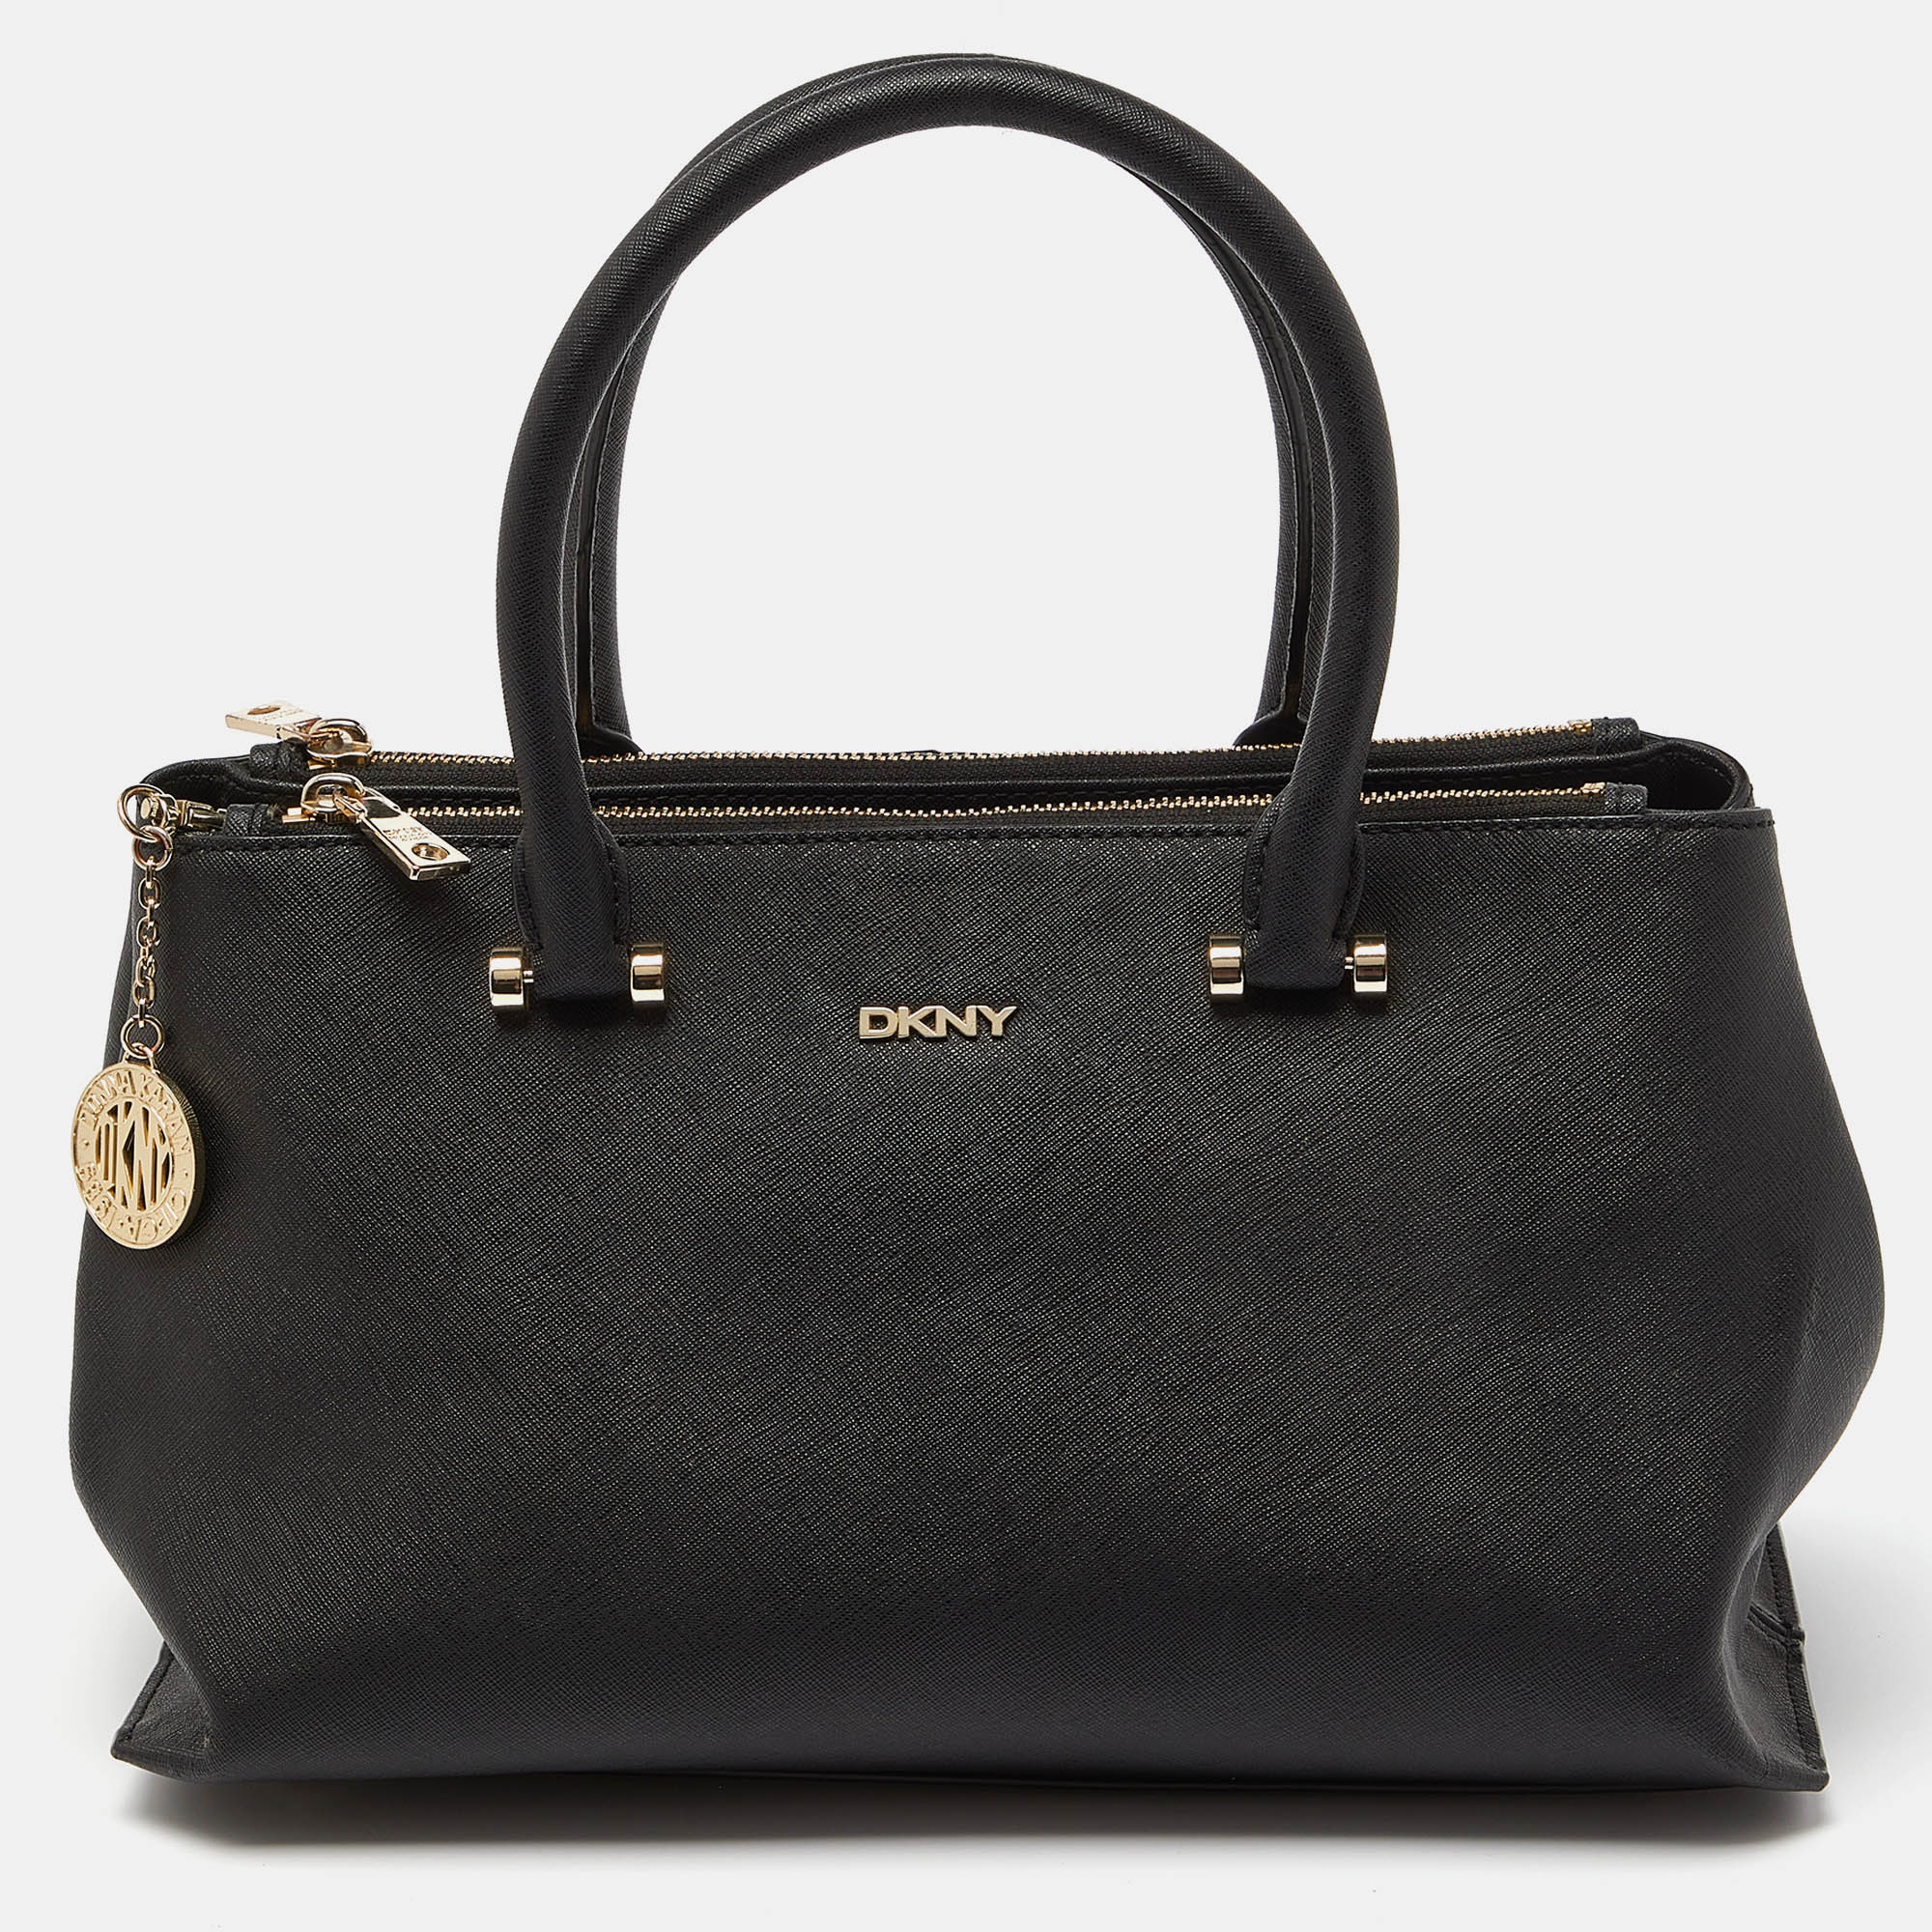 

DKNY Black Saffiano Leather Bryant Park Zip Tote